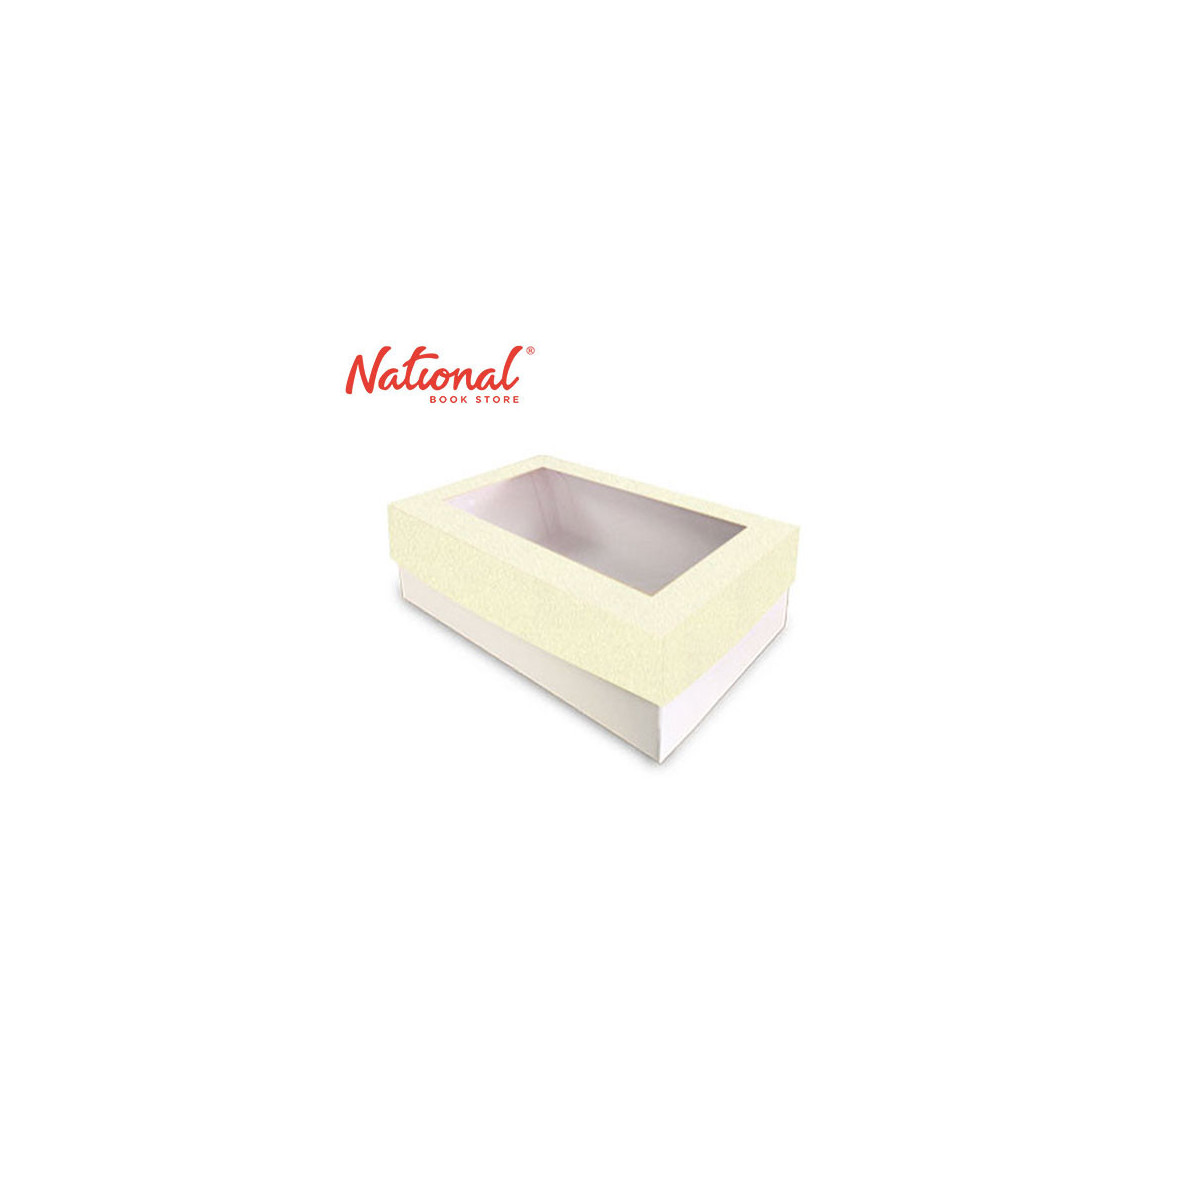 BossBox Plain Colored Gift Box 5S Stipple White RW2 with window 6x9x3 inches 3028721 - Giftwrapping Supplies